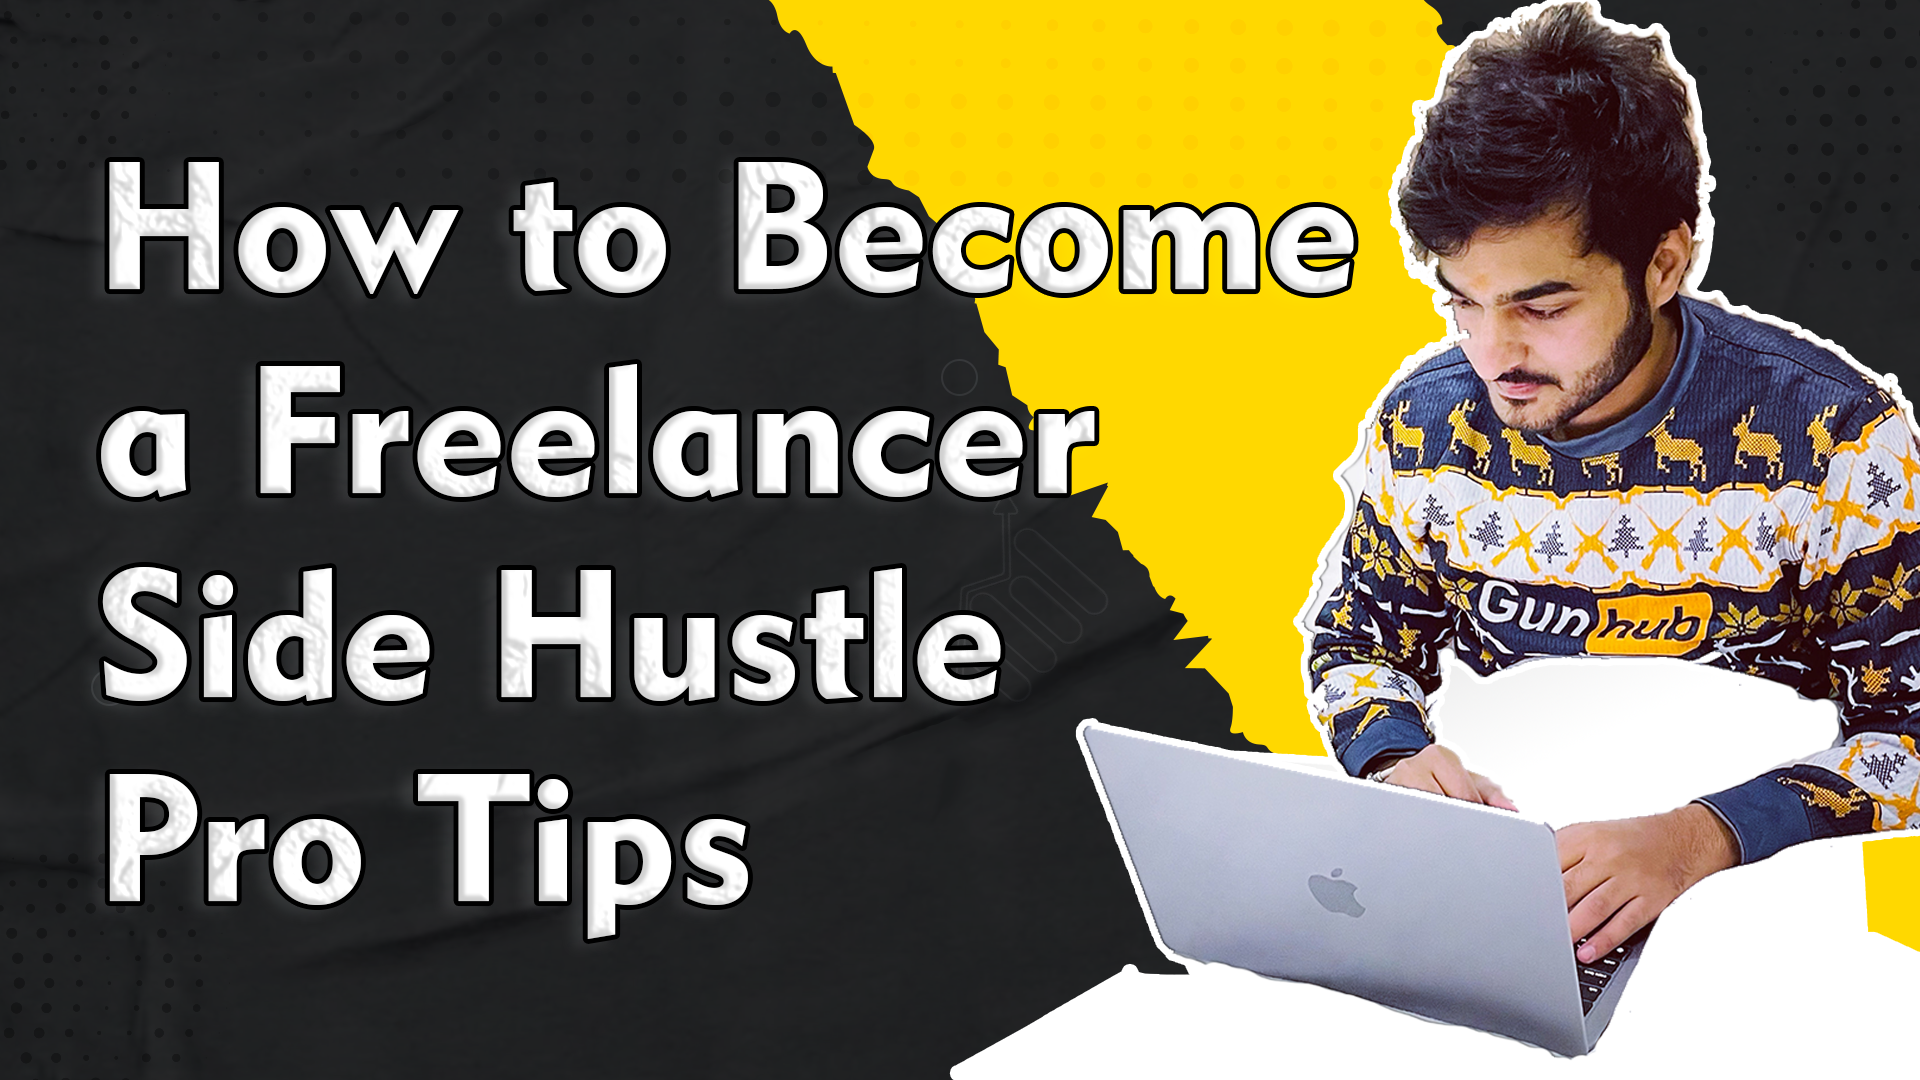 How to Become a Freelancer - Side Hustle Pro Tips